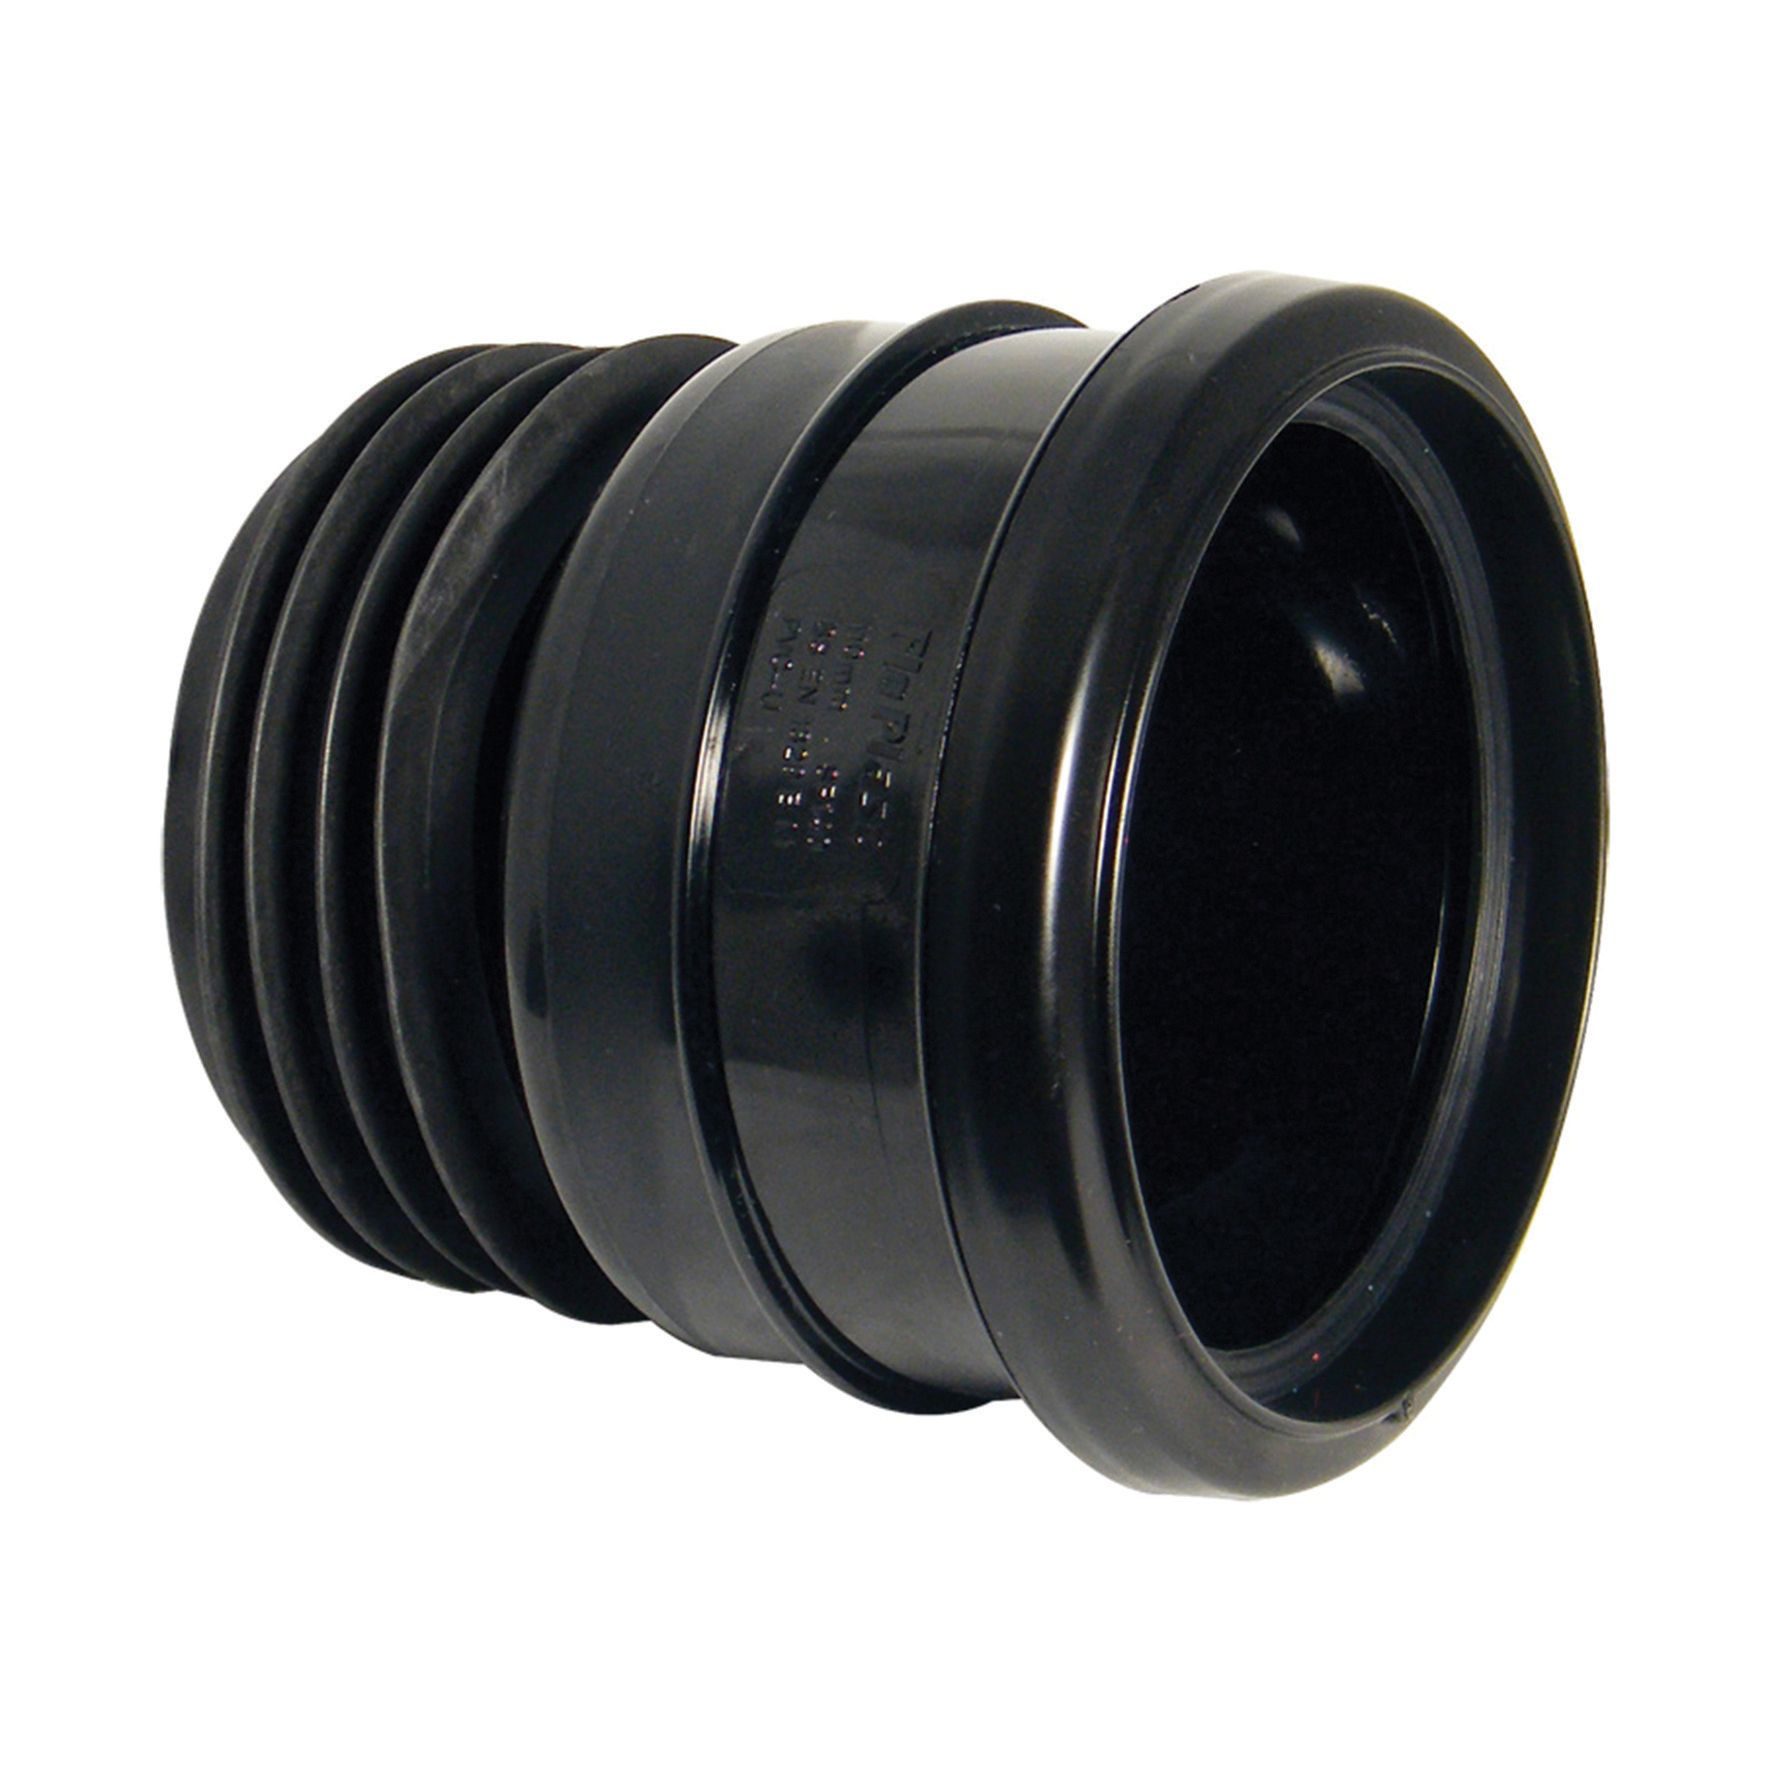 Image of FloPlast 110mm Universal Pipe Connector - Black